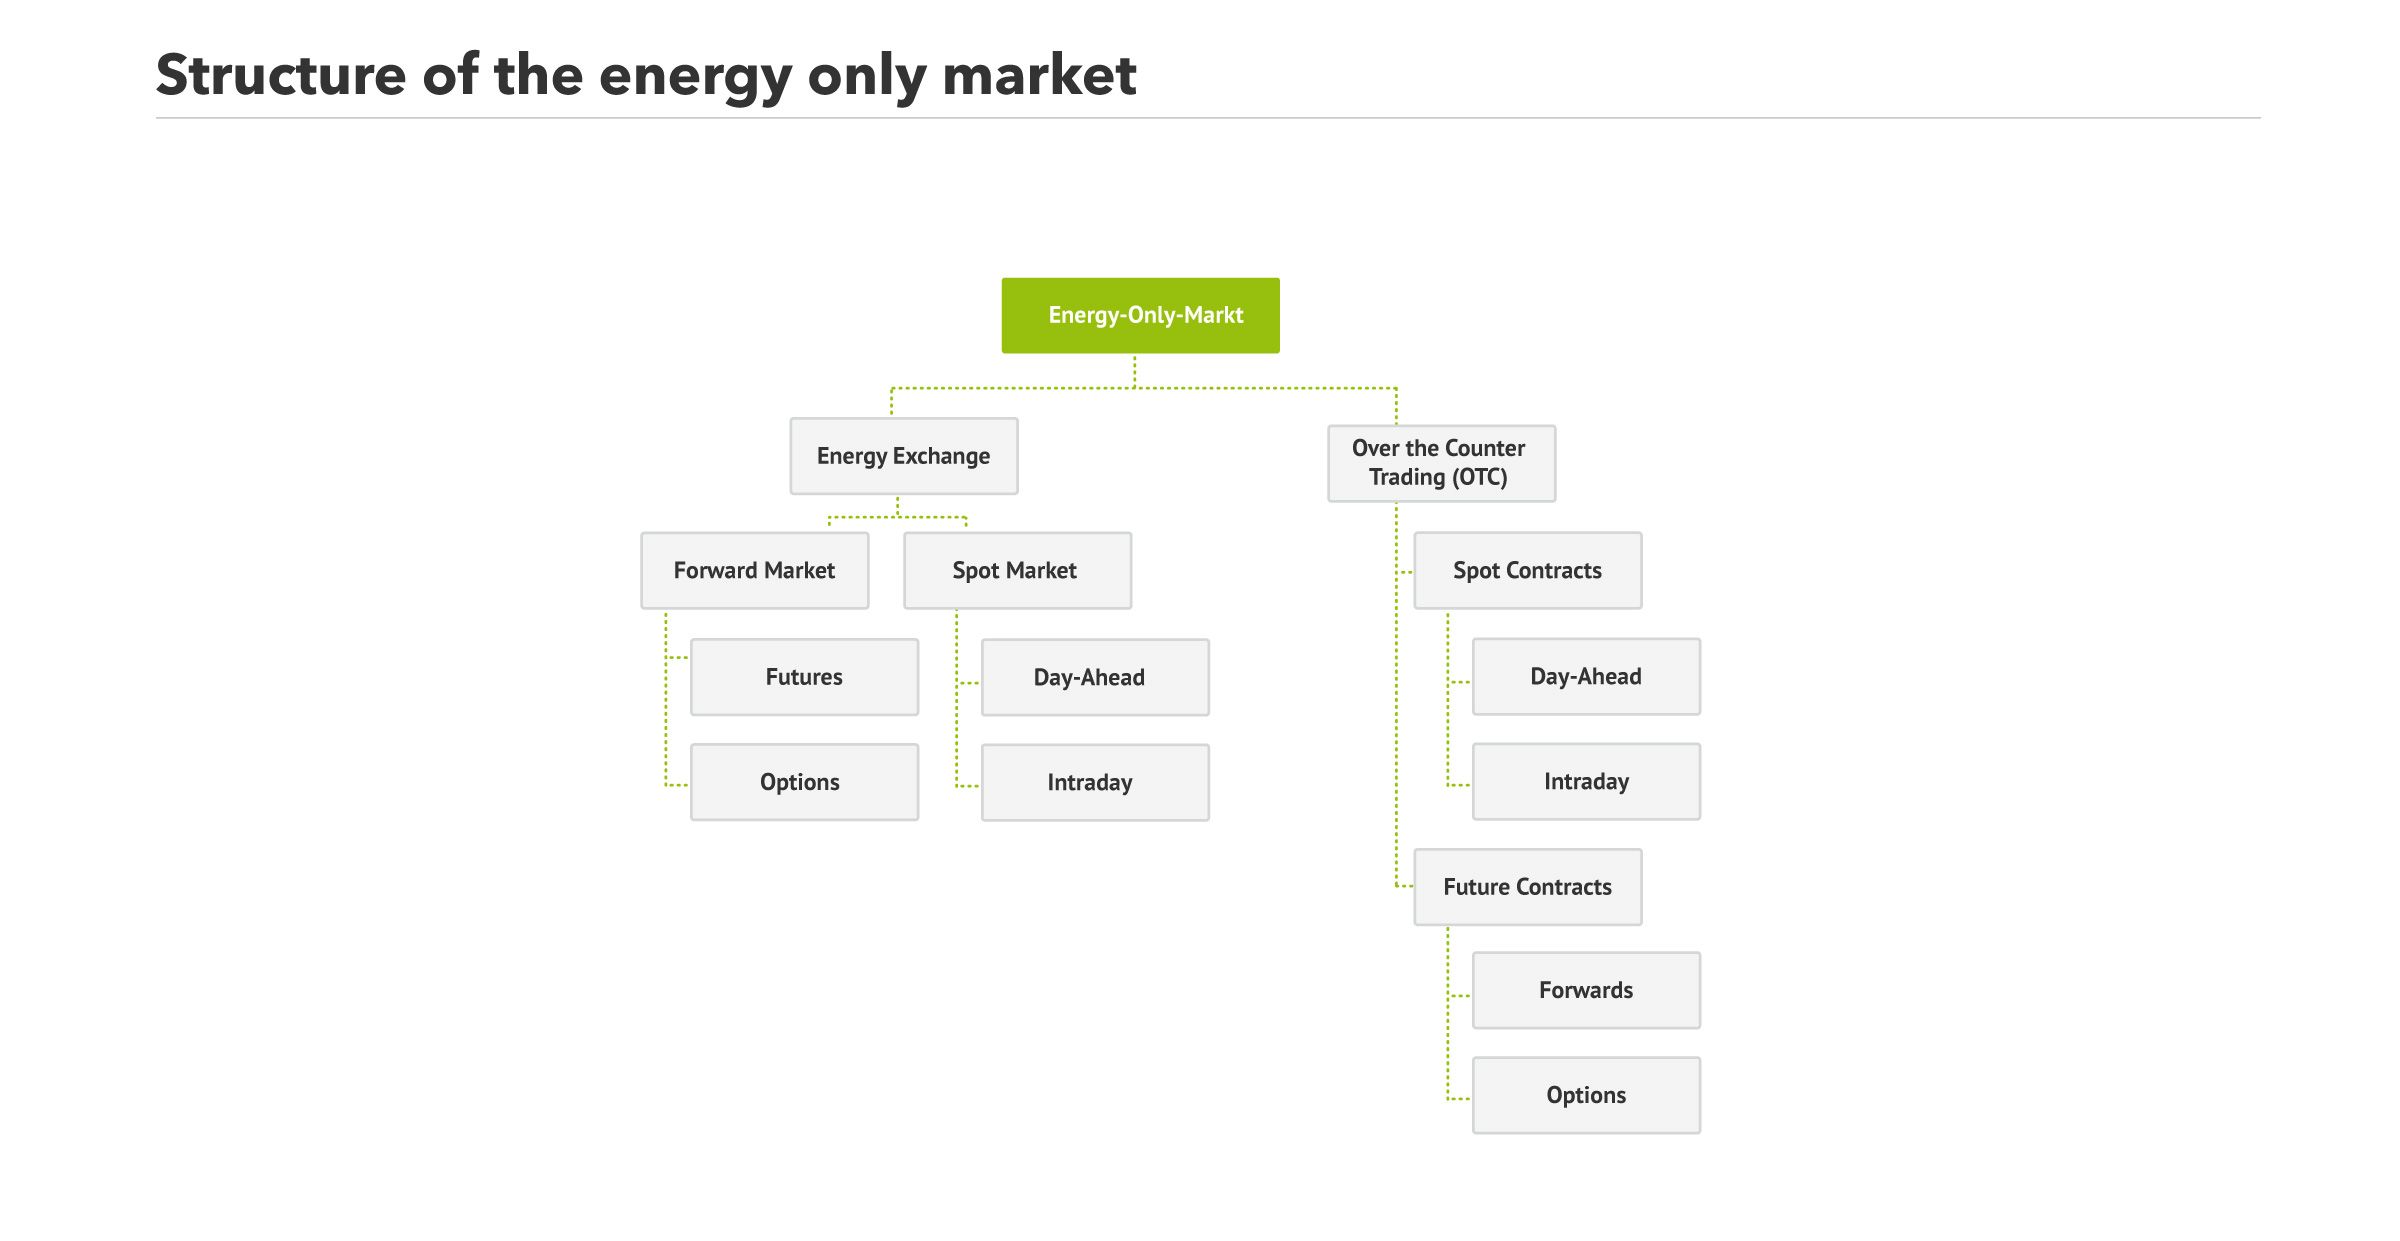 Organization and elements of the energy only market